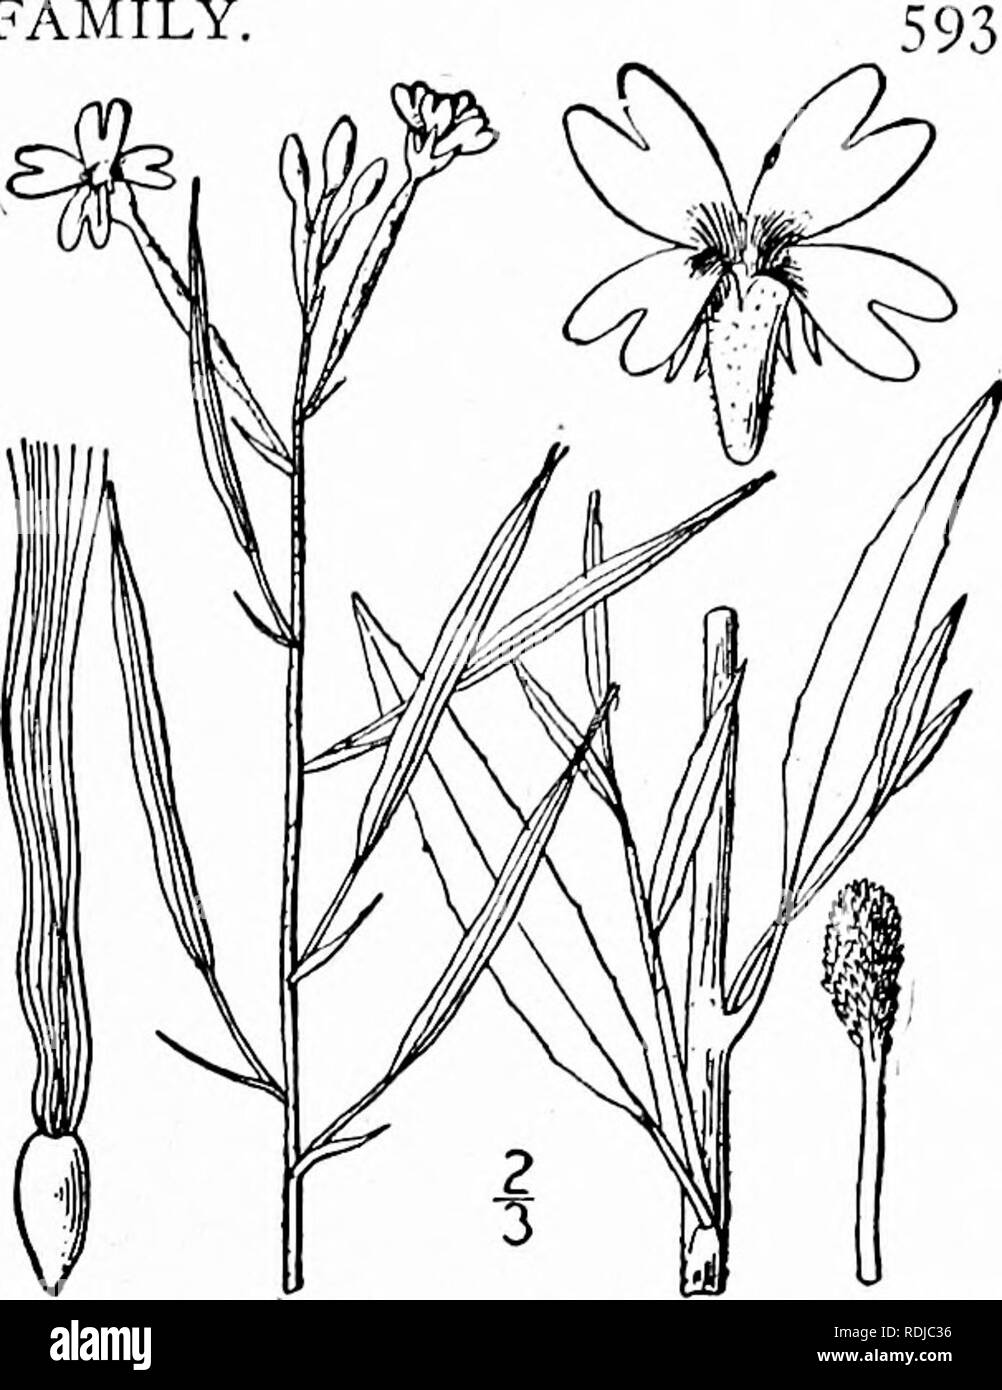 . An illustrated flora of the northern United States, Canada and the British possessions, from Newfoundland to the parallel of the southern boundary of Virginia, and from the Atlantic Ocean westward to the 102d meridian. Botany; Botany. Genus 6. EVENING-PRIMROSE FAMILY. 7. Epilobium paniculatum Nutt. Panicled Willow-herb. Fig. 3033. E. paniculatum Nutt.; T. &amp; G. Fl. N. A. i: 490. 1840. Annual, slender, i°-2° tall, loosely branched, gla- brous below, glandular-pubescent above, the stem terete. Leaves alternate, varying from linear to linear-lanceolate, I's' long, acute, denticulate or nearl Stock Photo